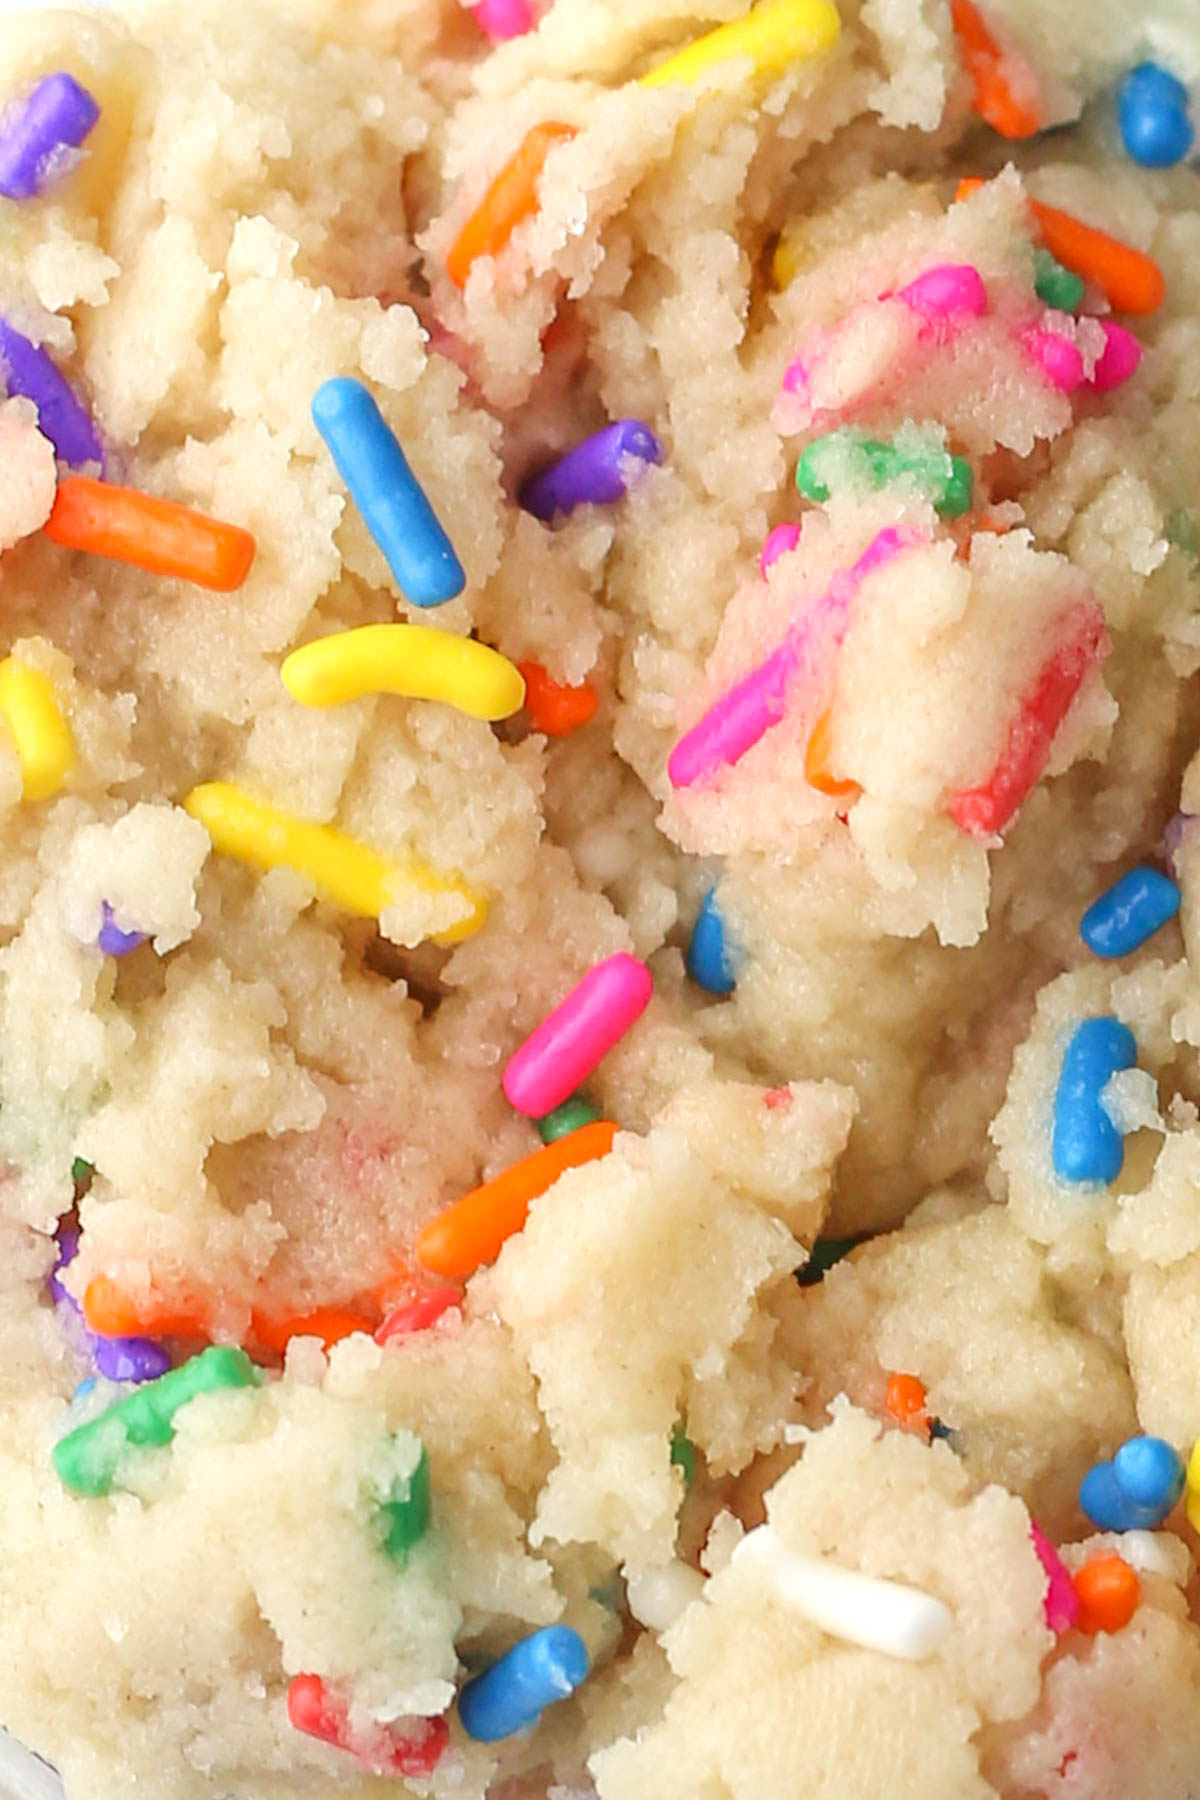 Macro shot of edible sugar cookie dough with rainbow sprinkles, showing the soft texture.